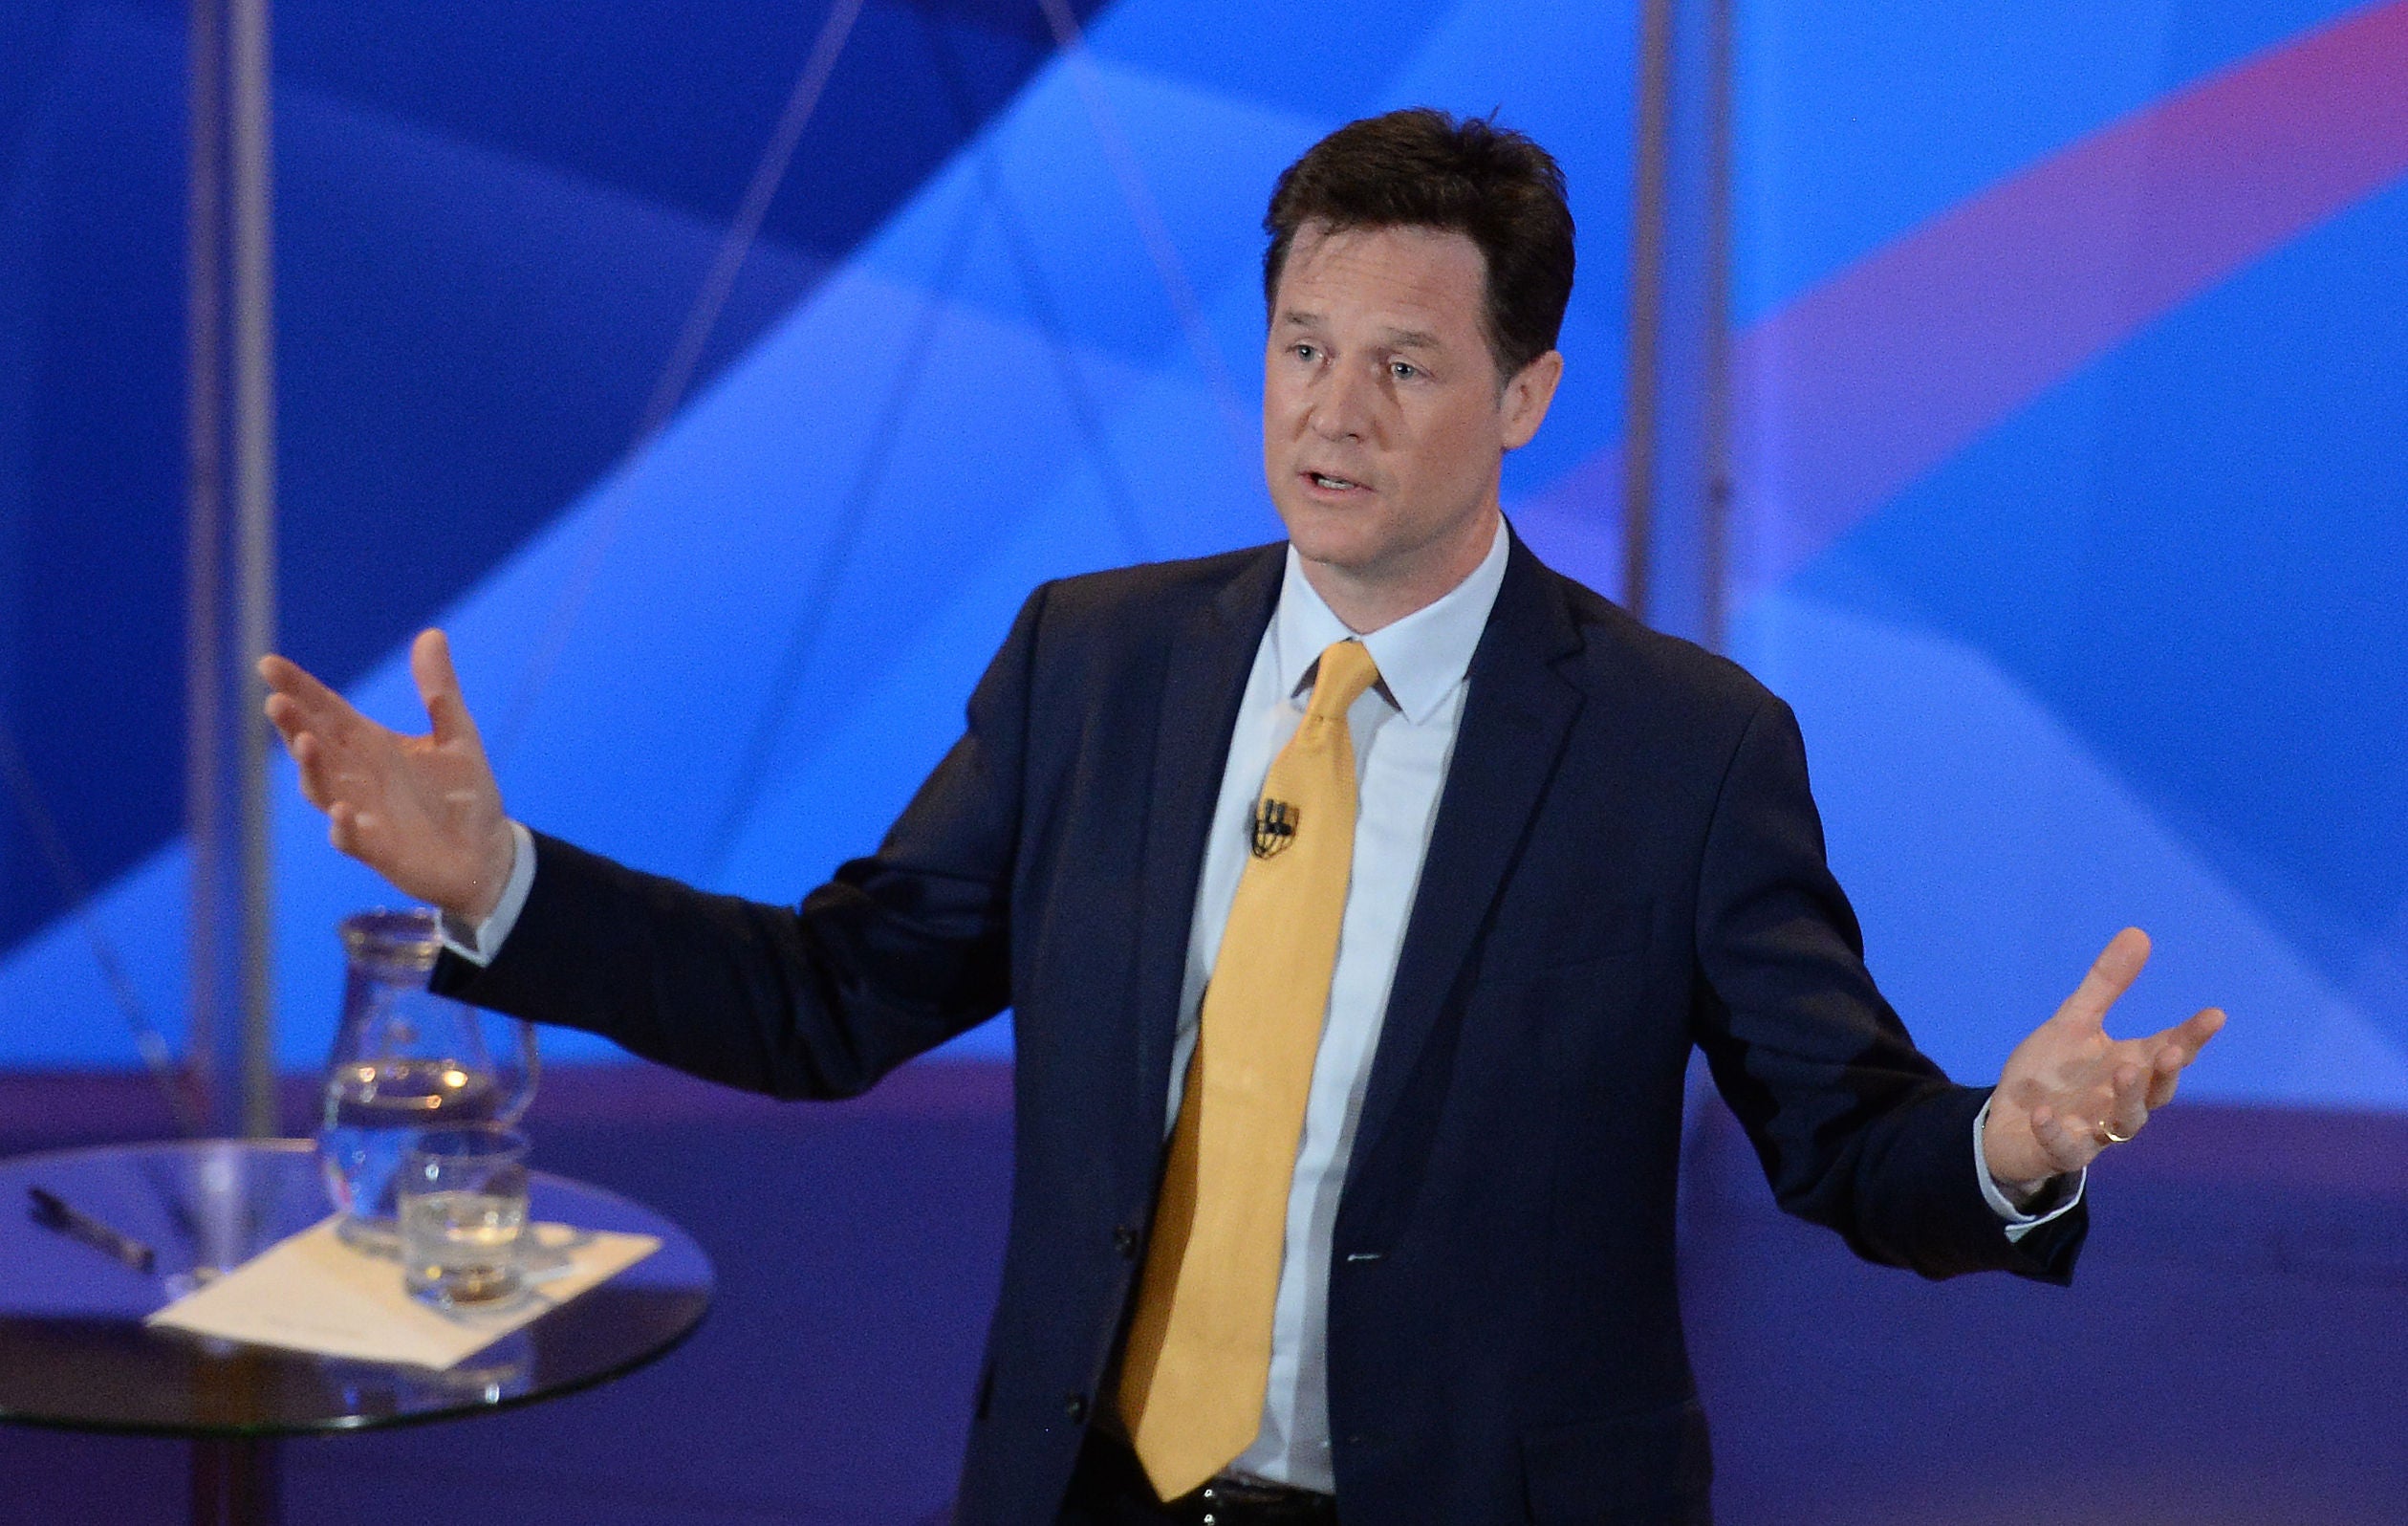 Nick Clegg was the last to take to the stage in the Question Time debate